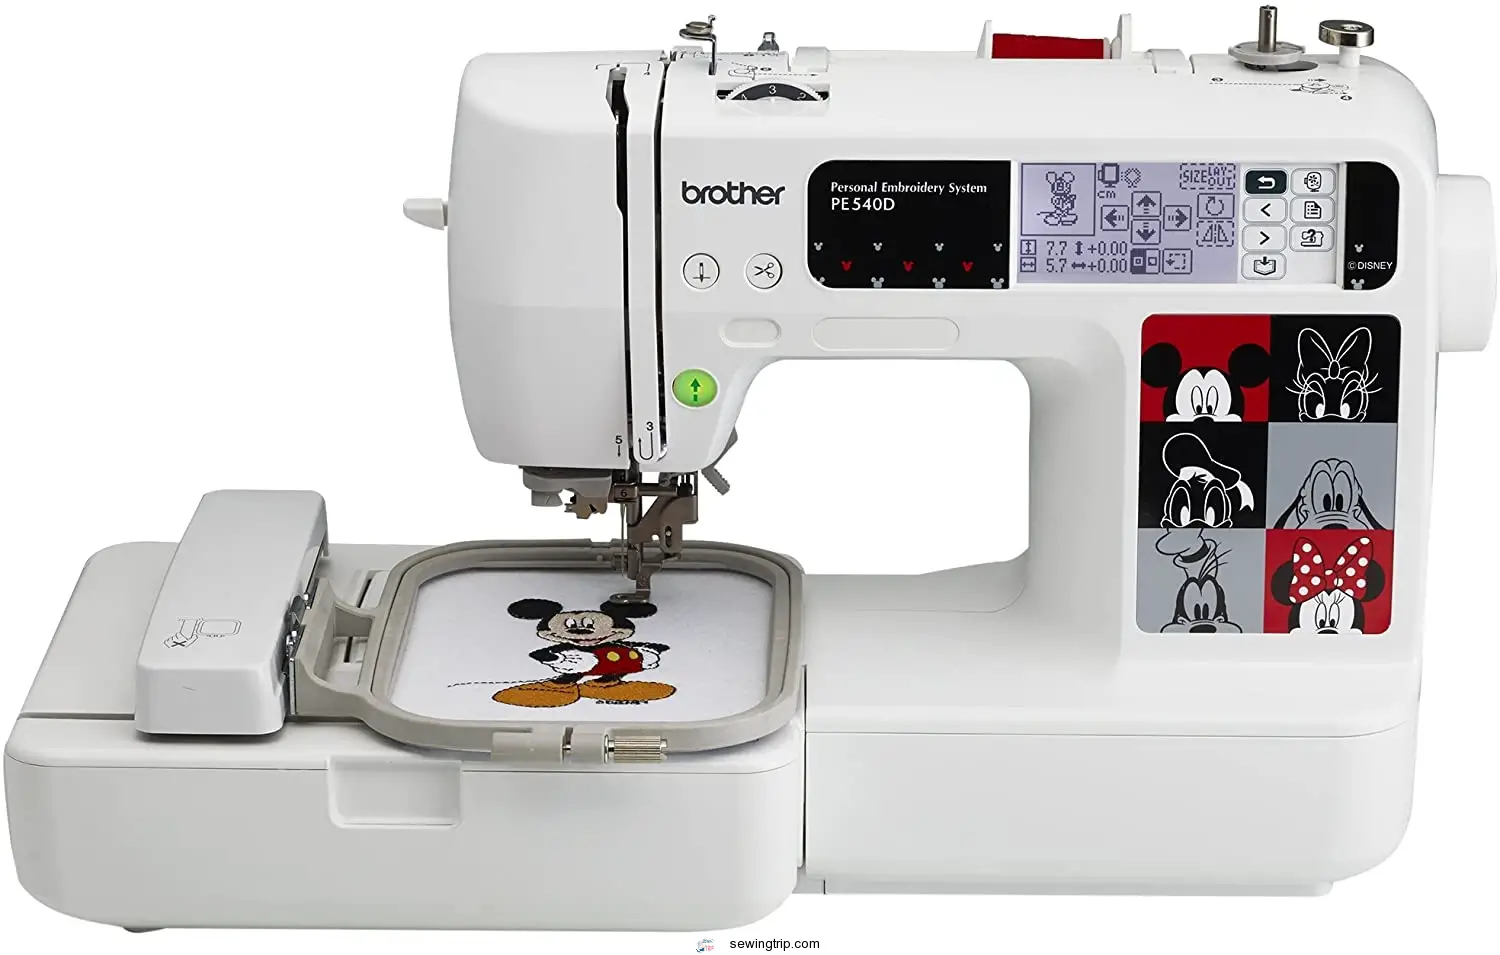 Brother PE540D 4x4 Embroidery Machine